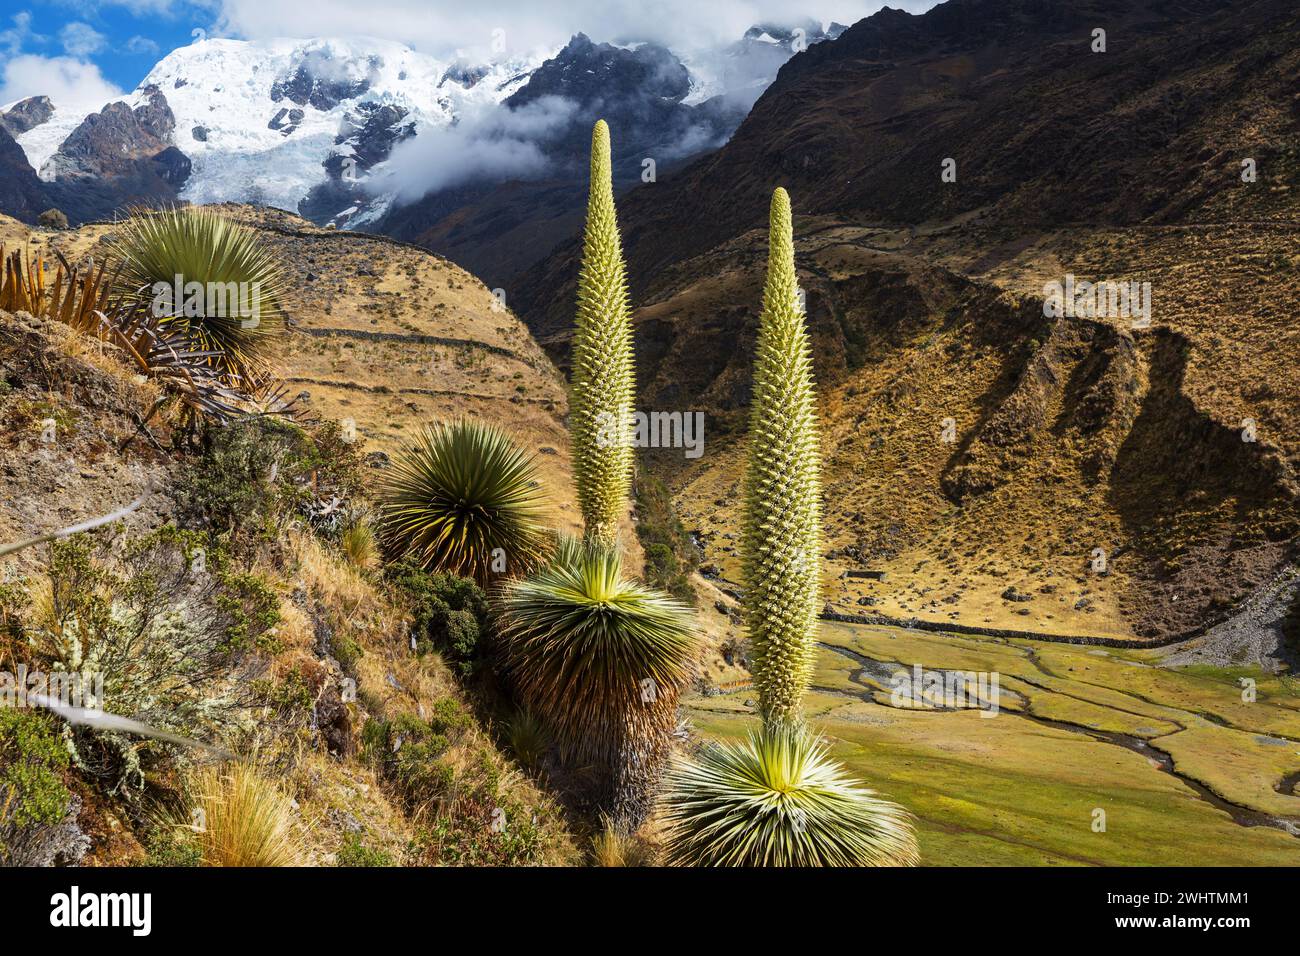 Hiking in the fantastic landscape of the Peruvian high mountain Andes Stock Photo